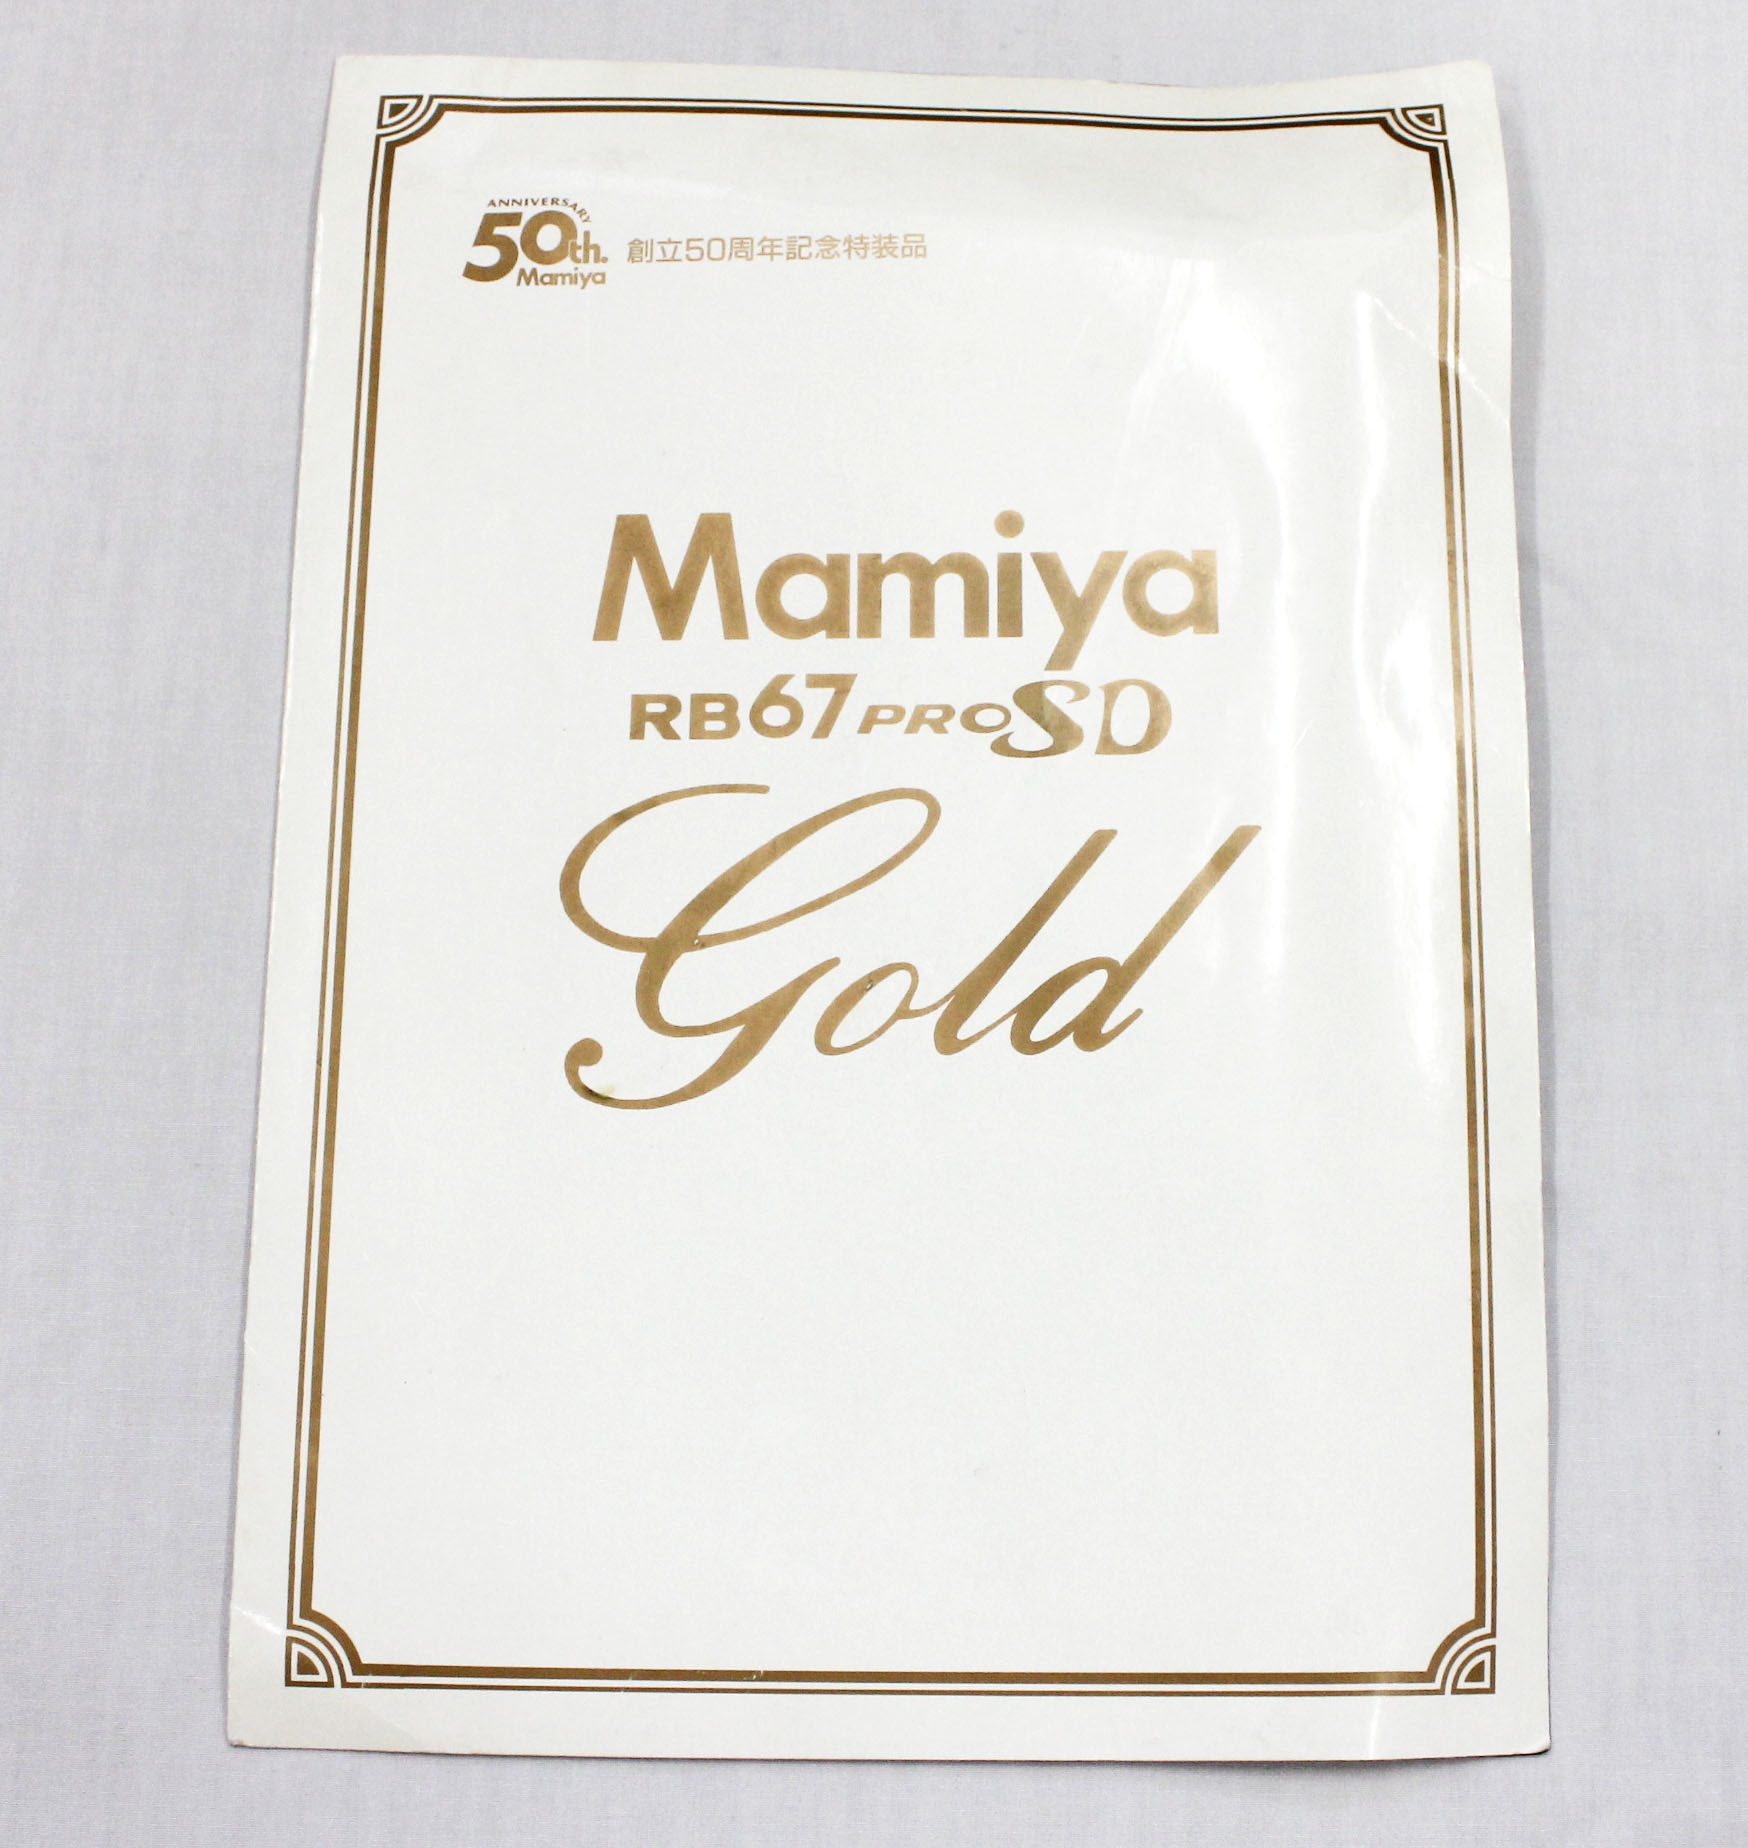 Mamiya RB67 Pro SD Gold K/L 127mm F/3.5 50 Years Limited Edition of 300 from Japan Photo 24